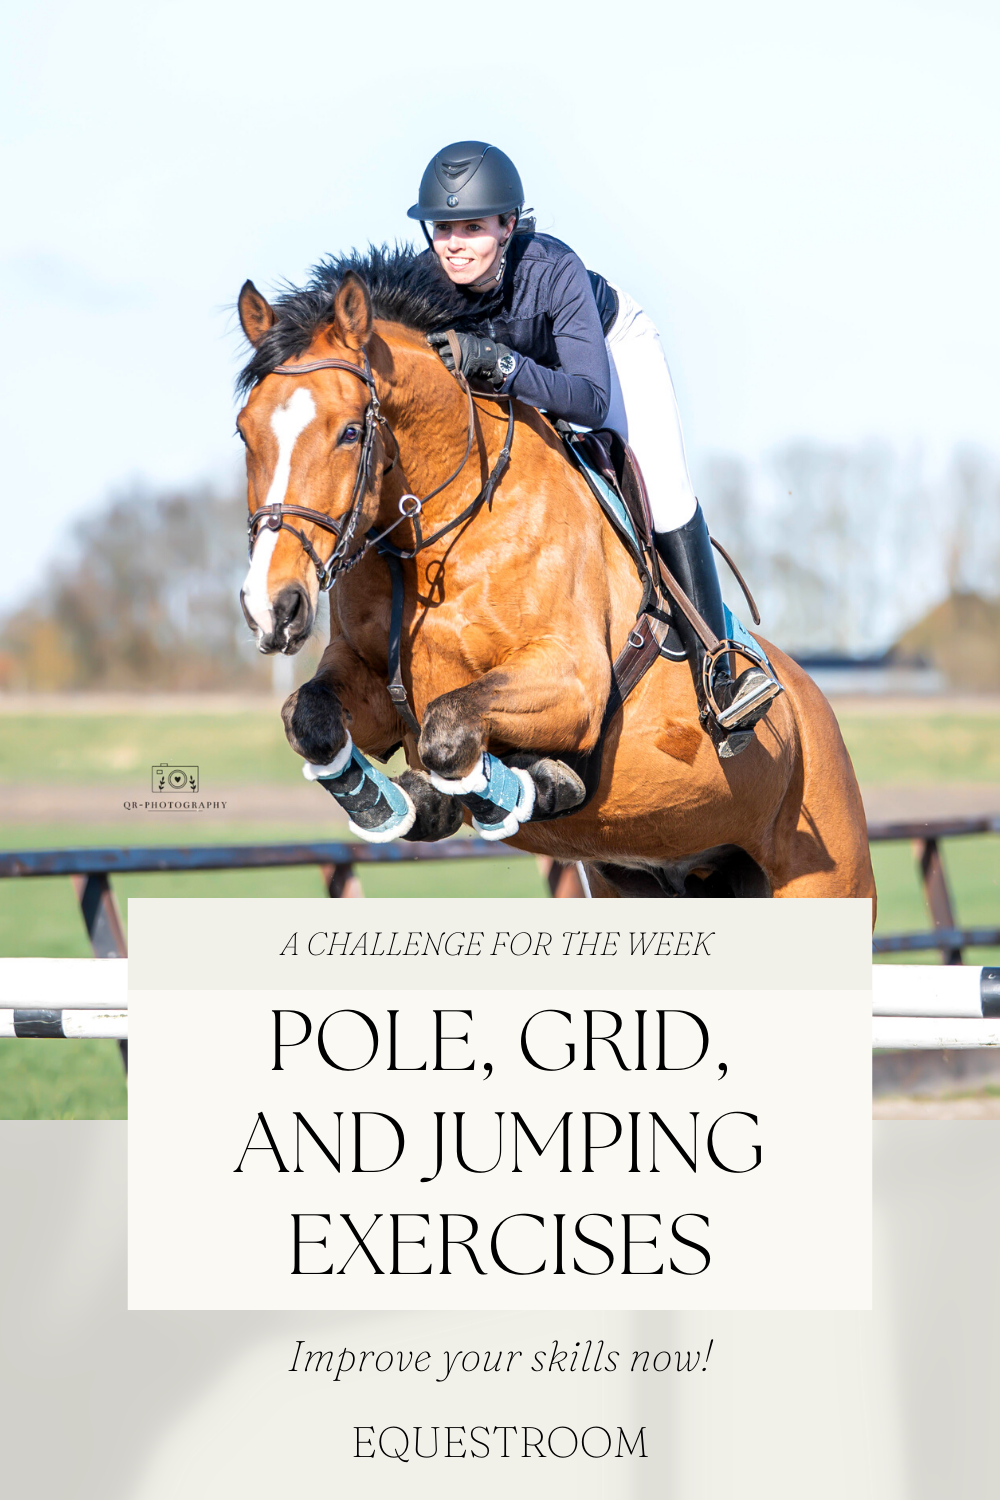 POLE, GRID AND JUMPING EXERCISES